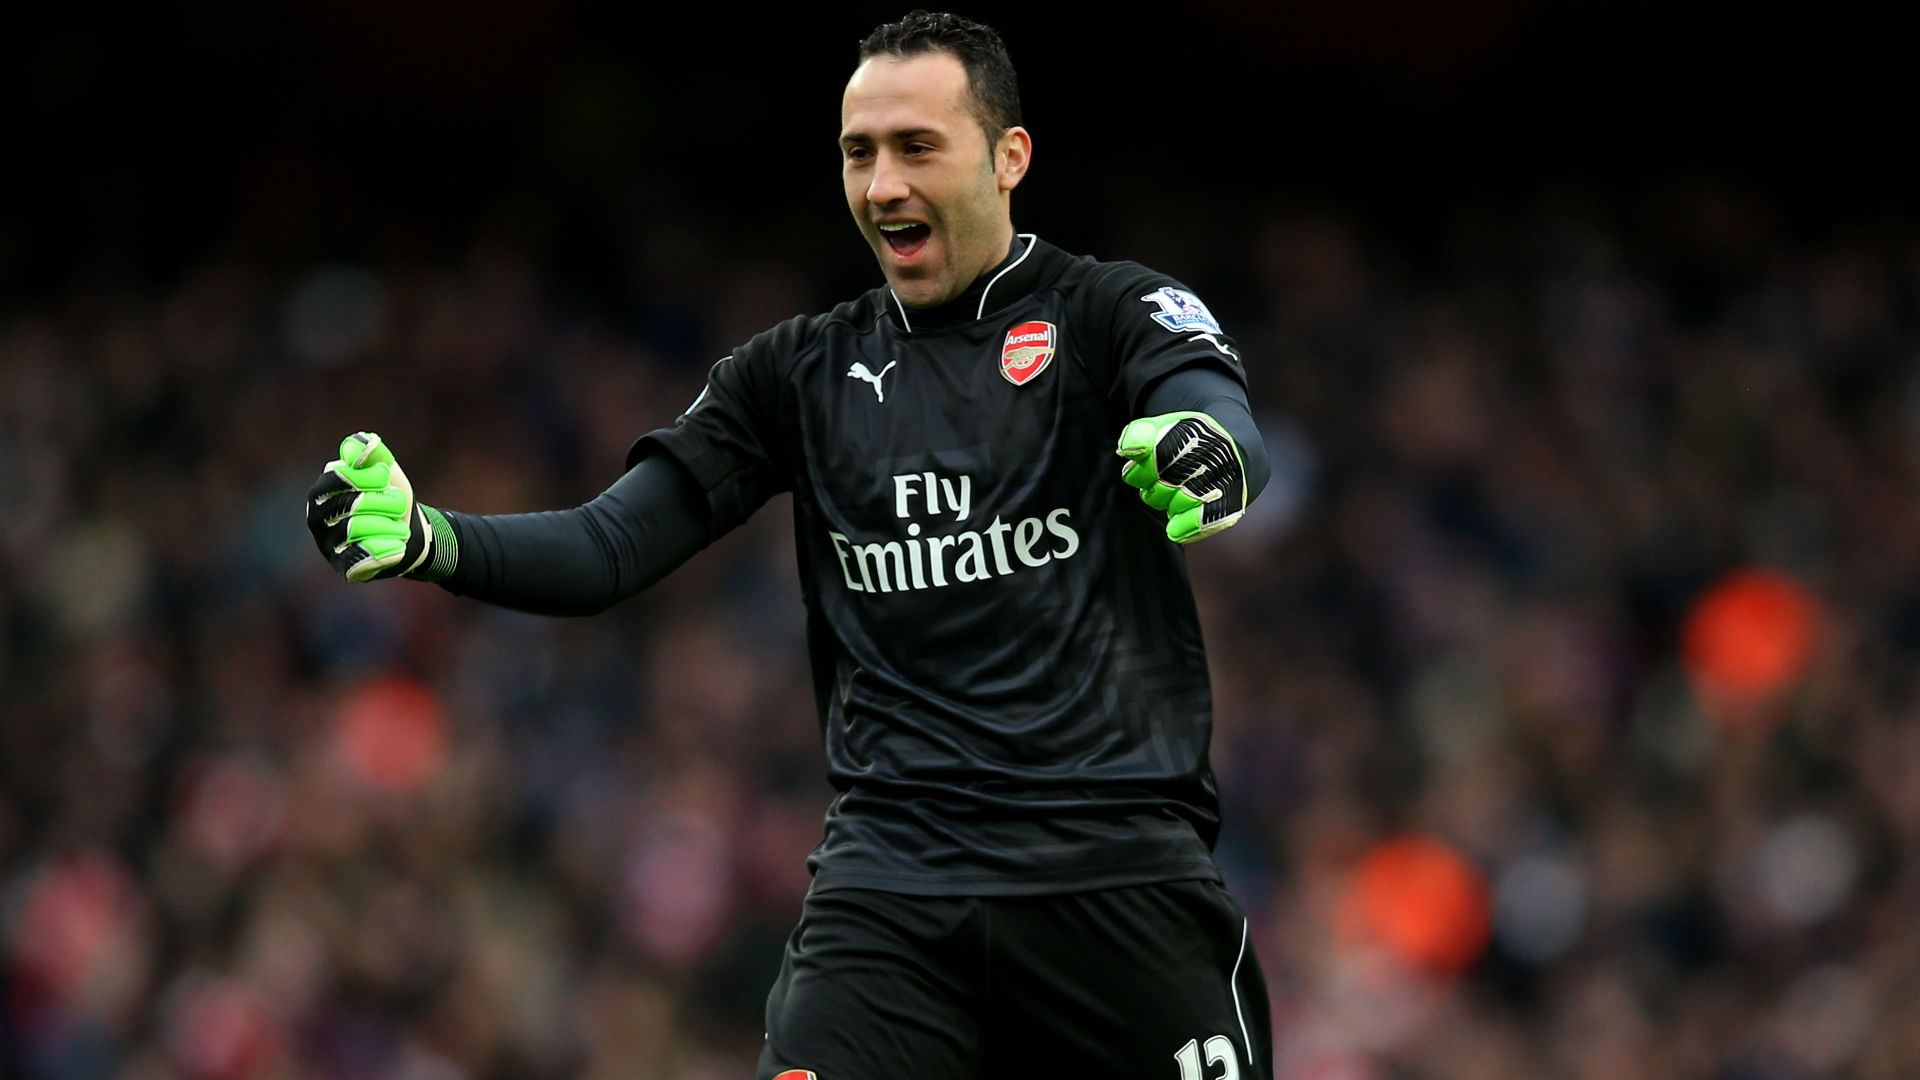 Arsenal S David Ospina Colombia Had An Even Better Save On